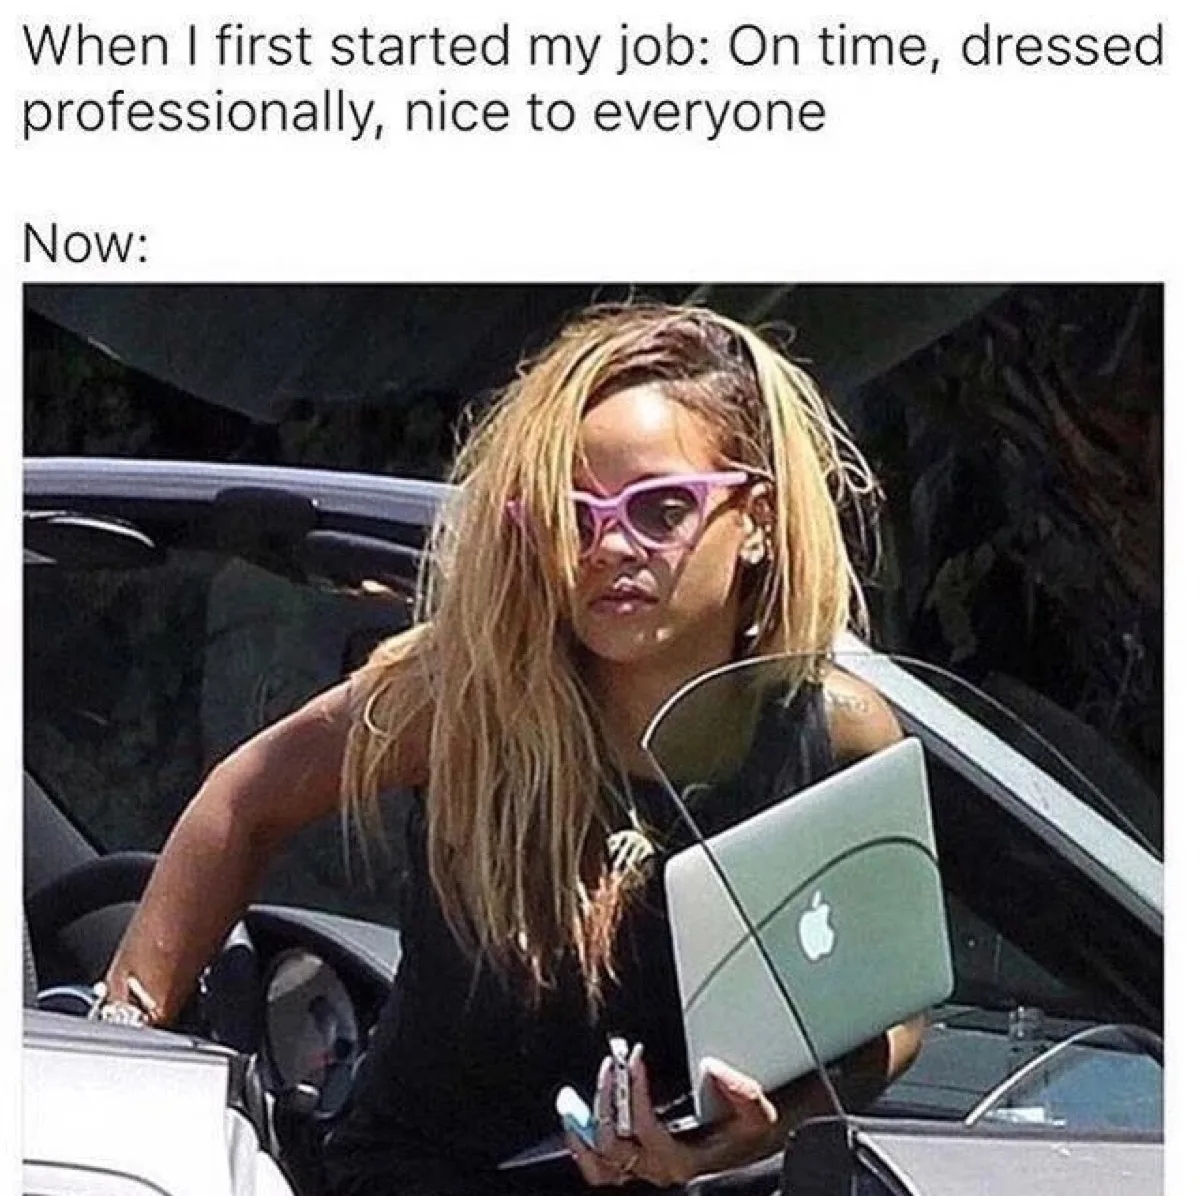 When I first started this job vs Now meme